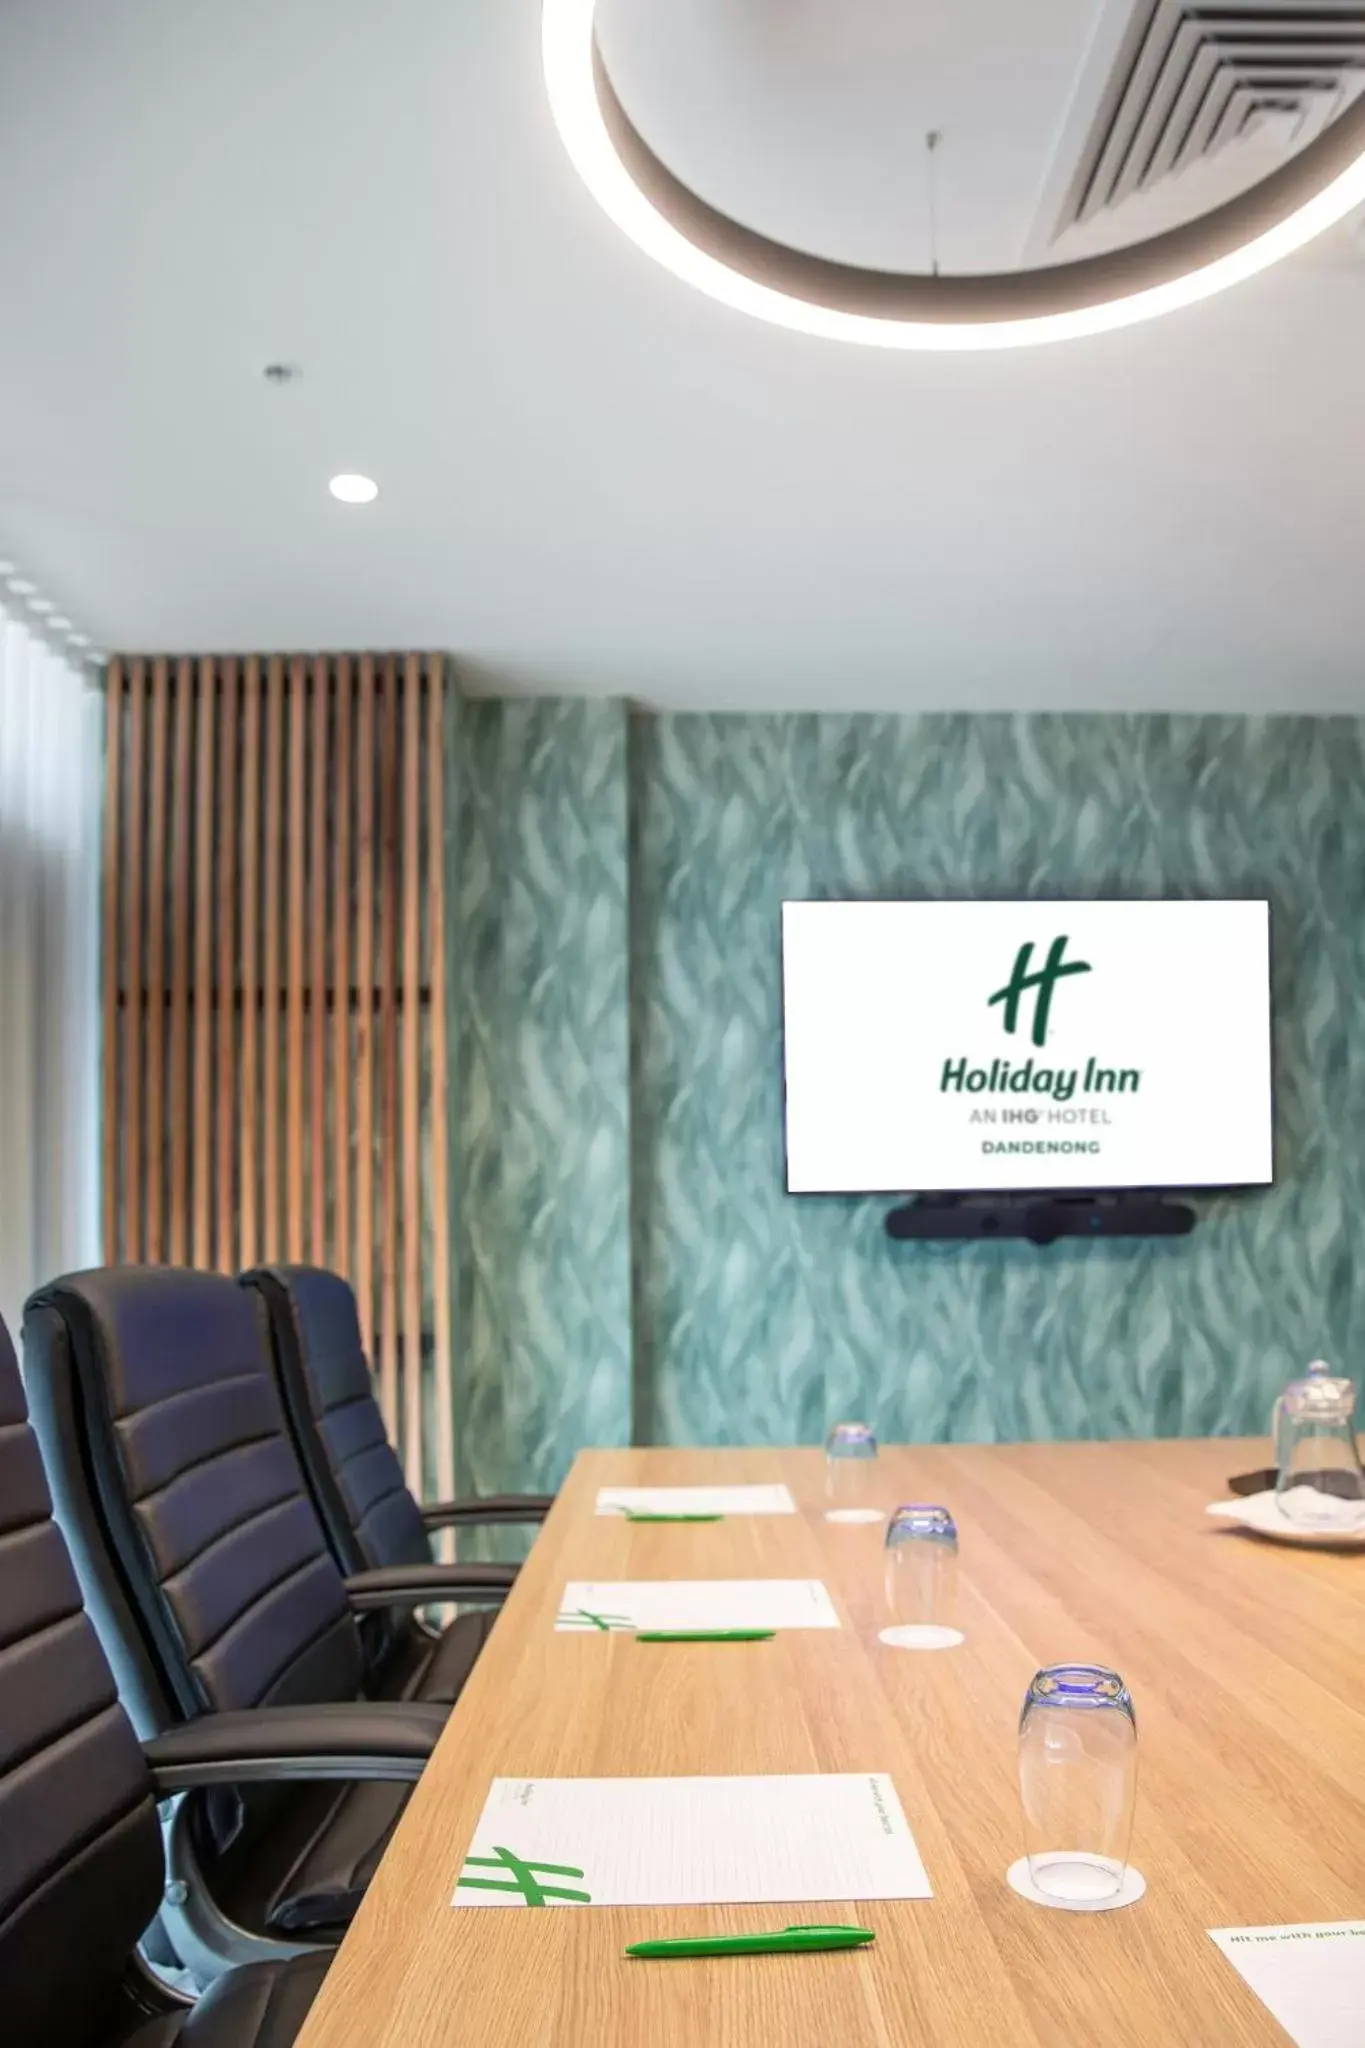 Meeting/conference room in Holiday Inn Dandenong, an IHG Hotel